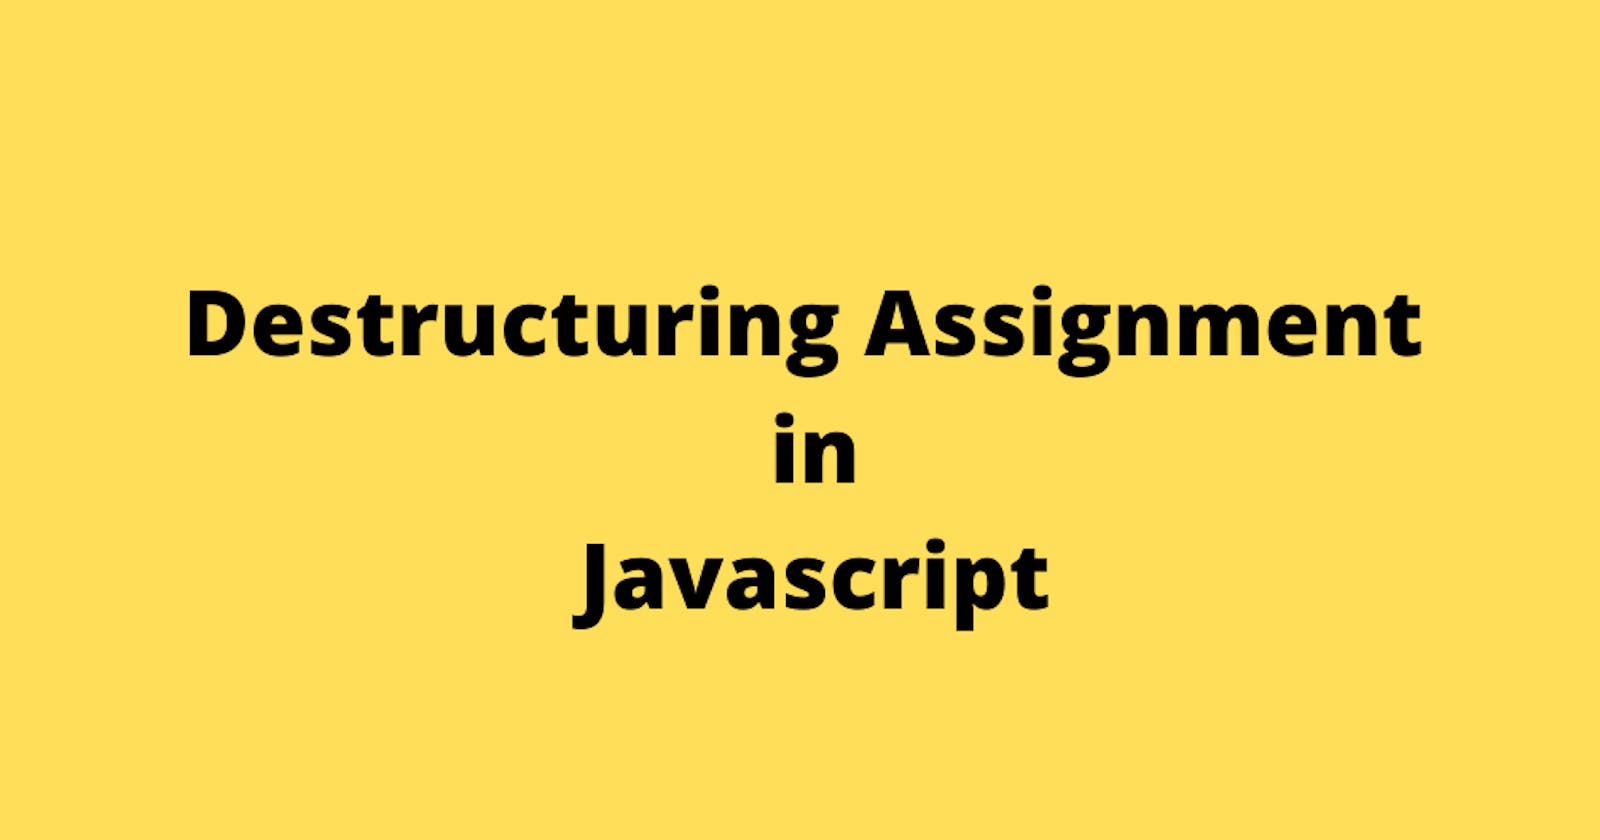 Destructuring Assignment in Javascript